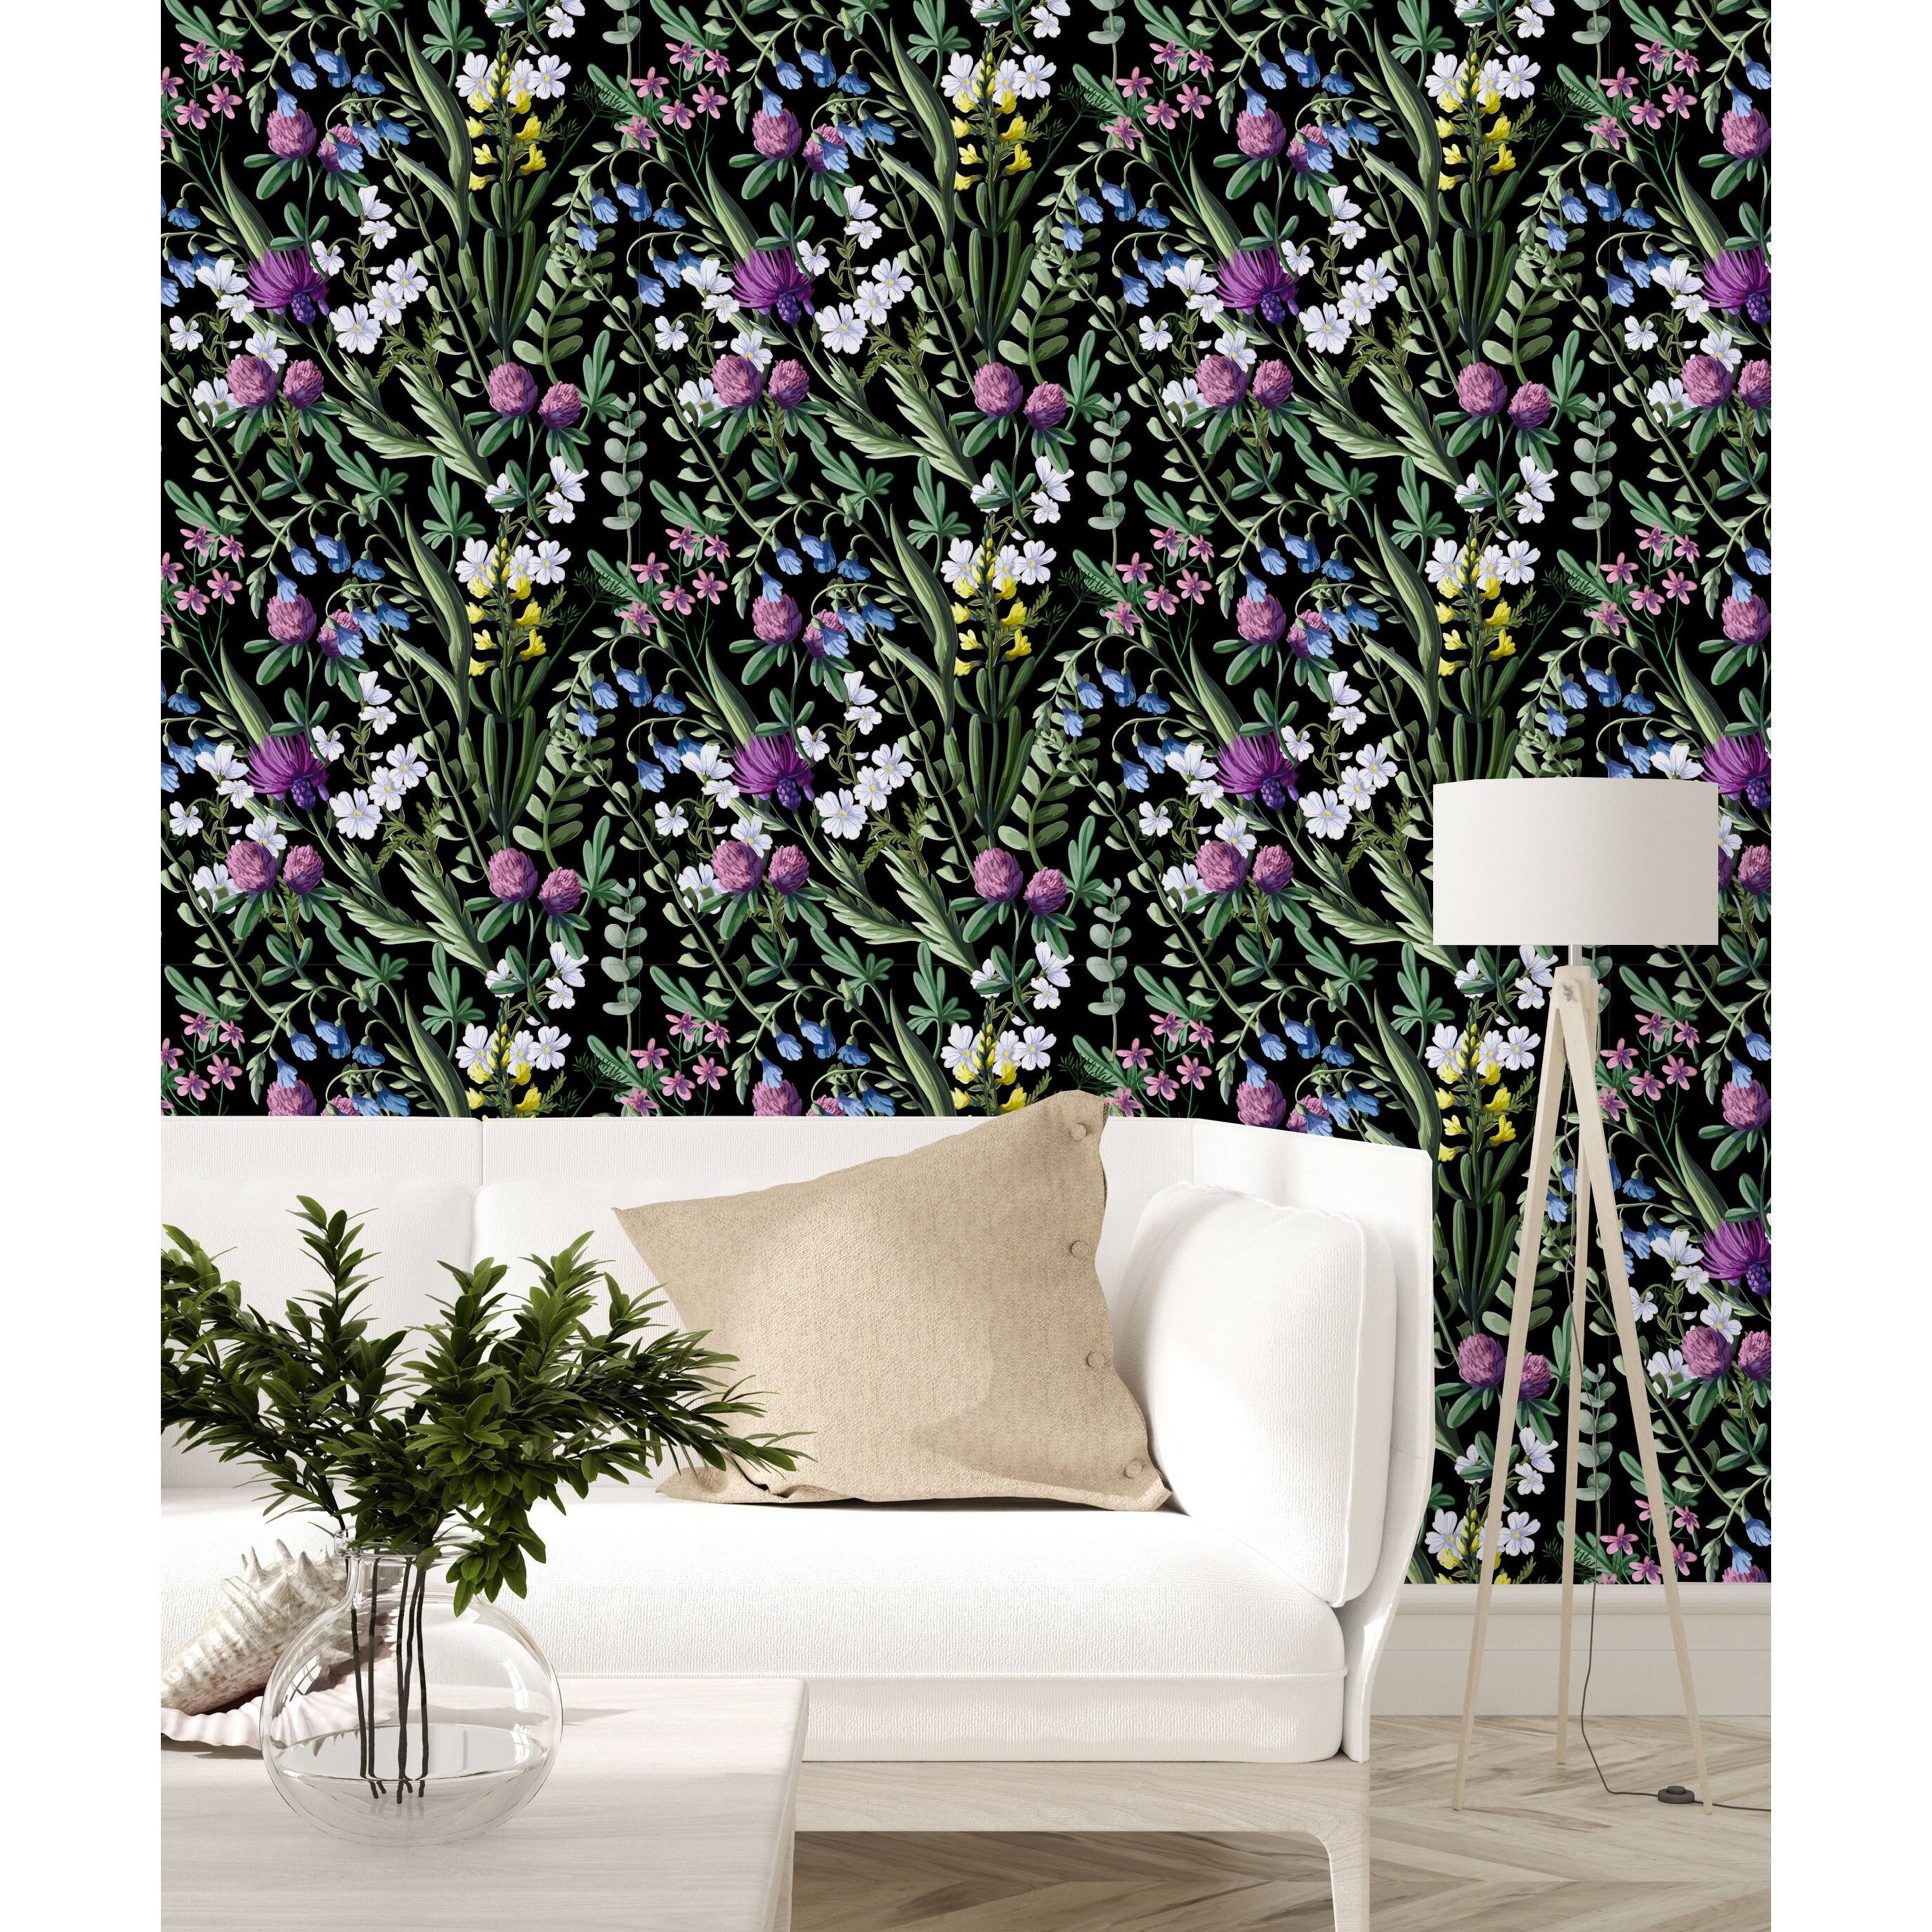 Forest Flowers on Black Background Wallpaper - Bed Bath & Beyond - 34988265